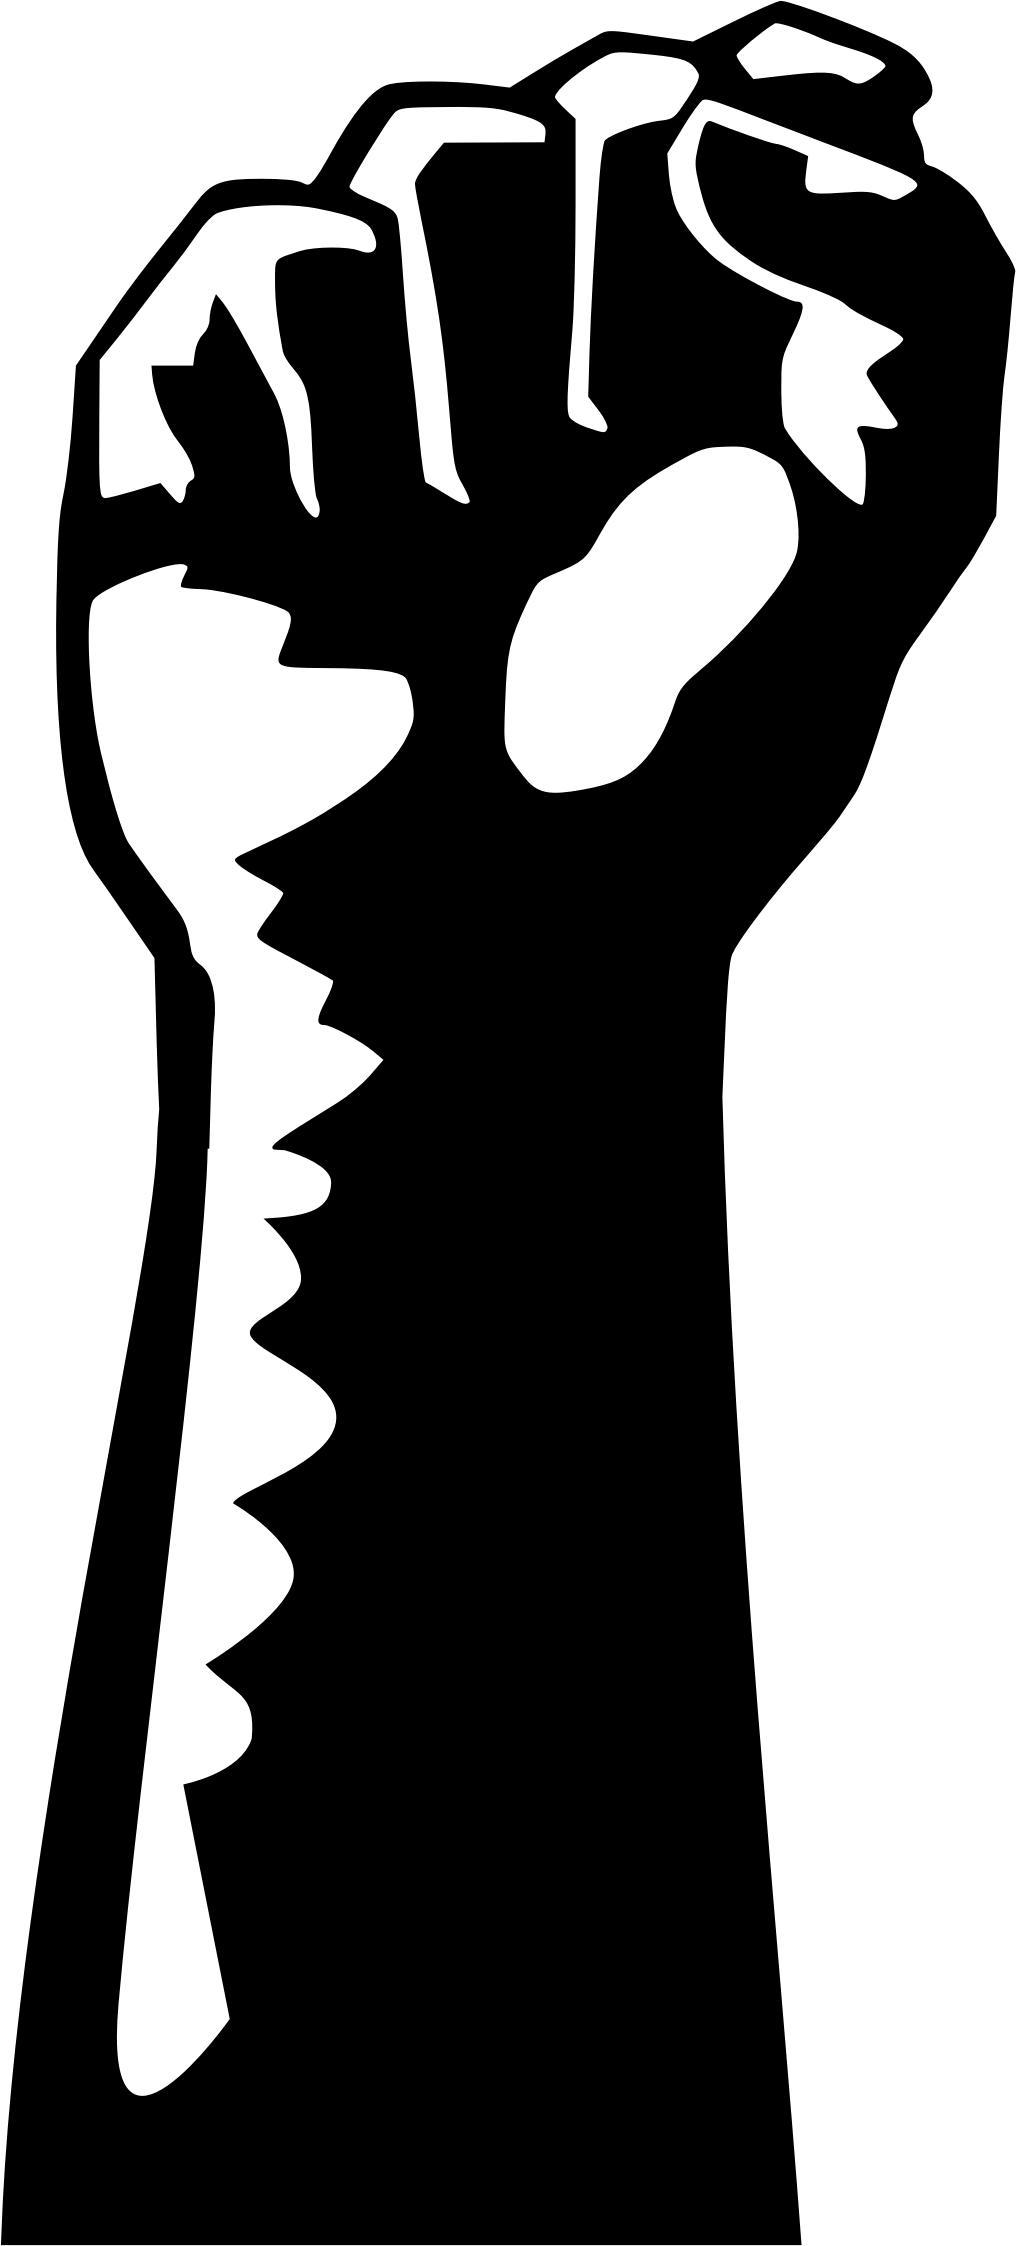 workers fist png transparent